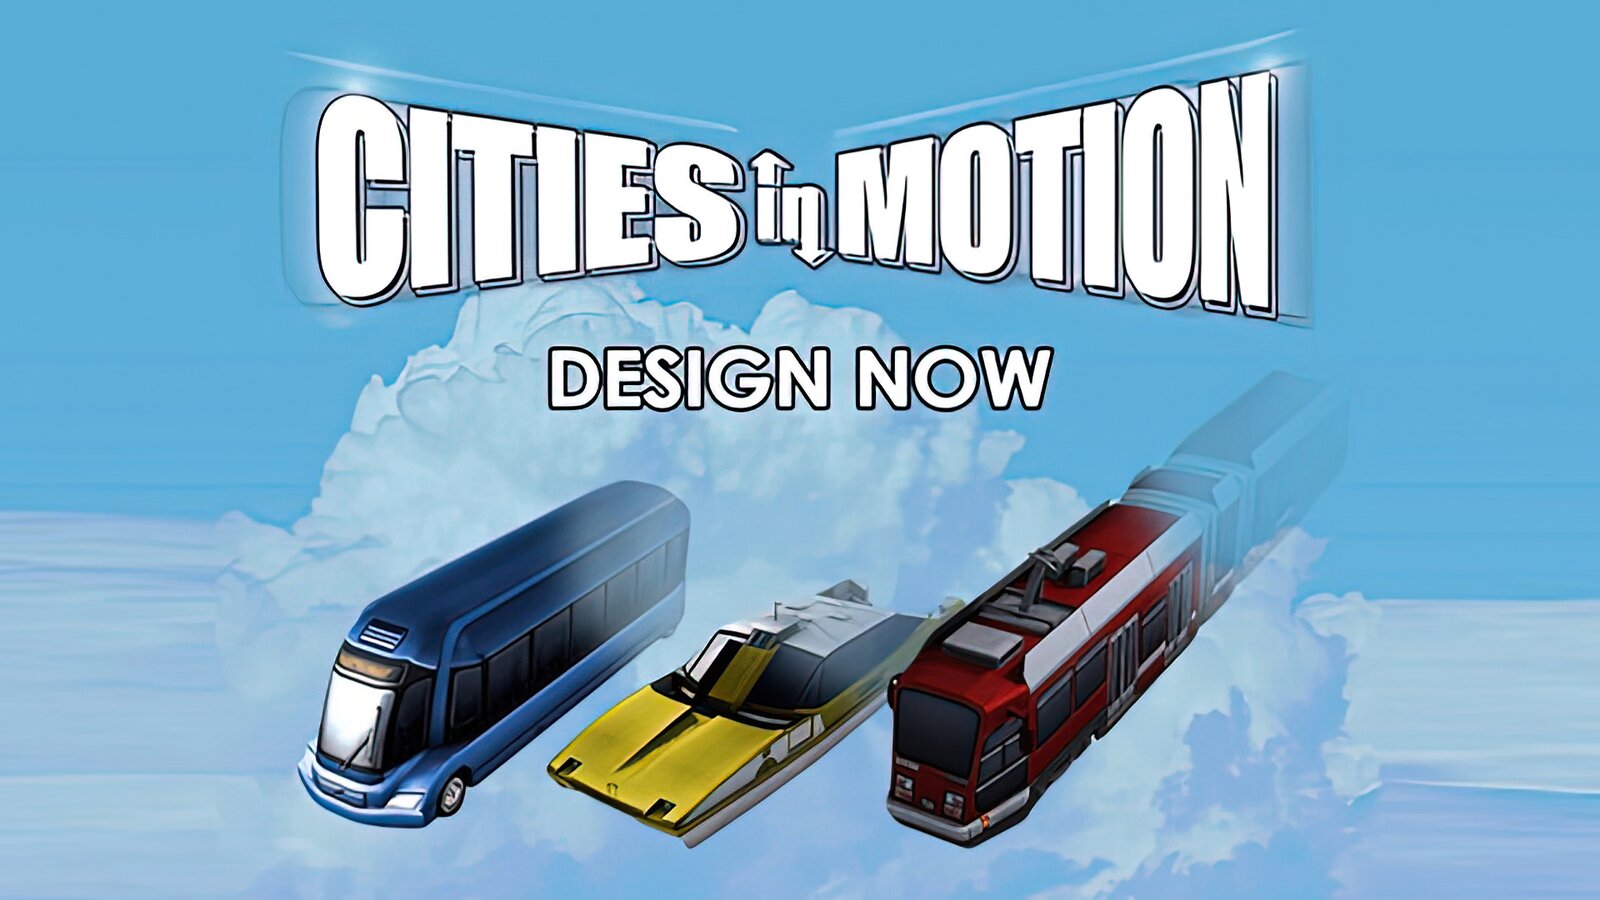 Cities in Motion - Design Now